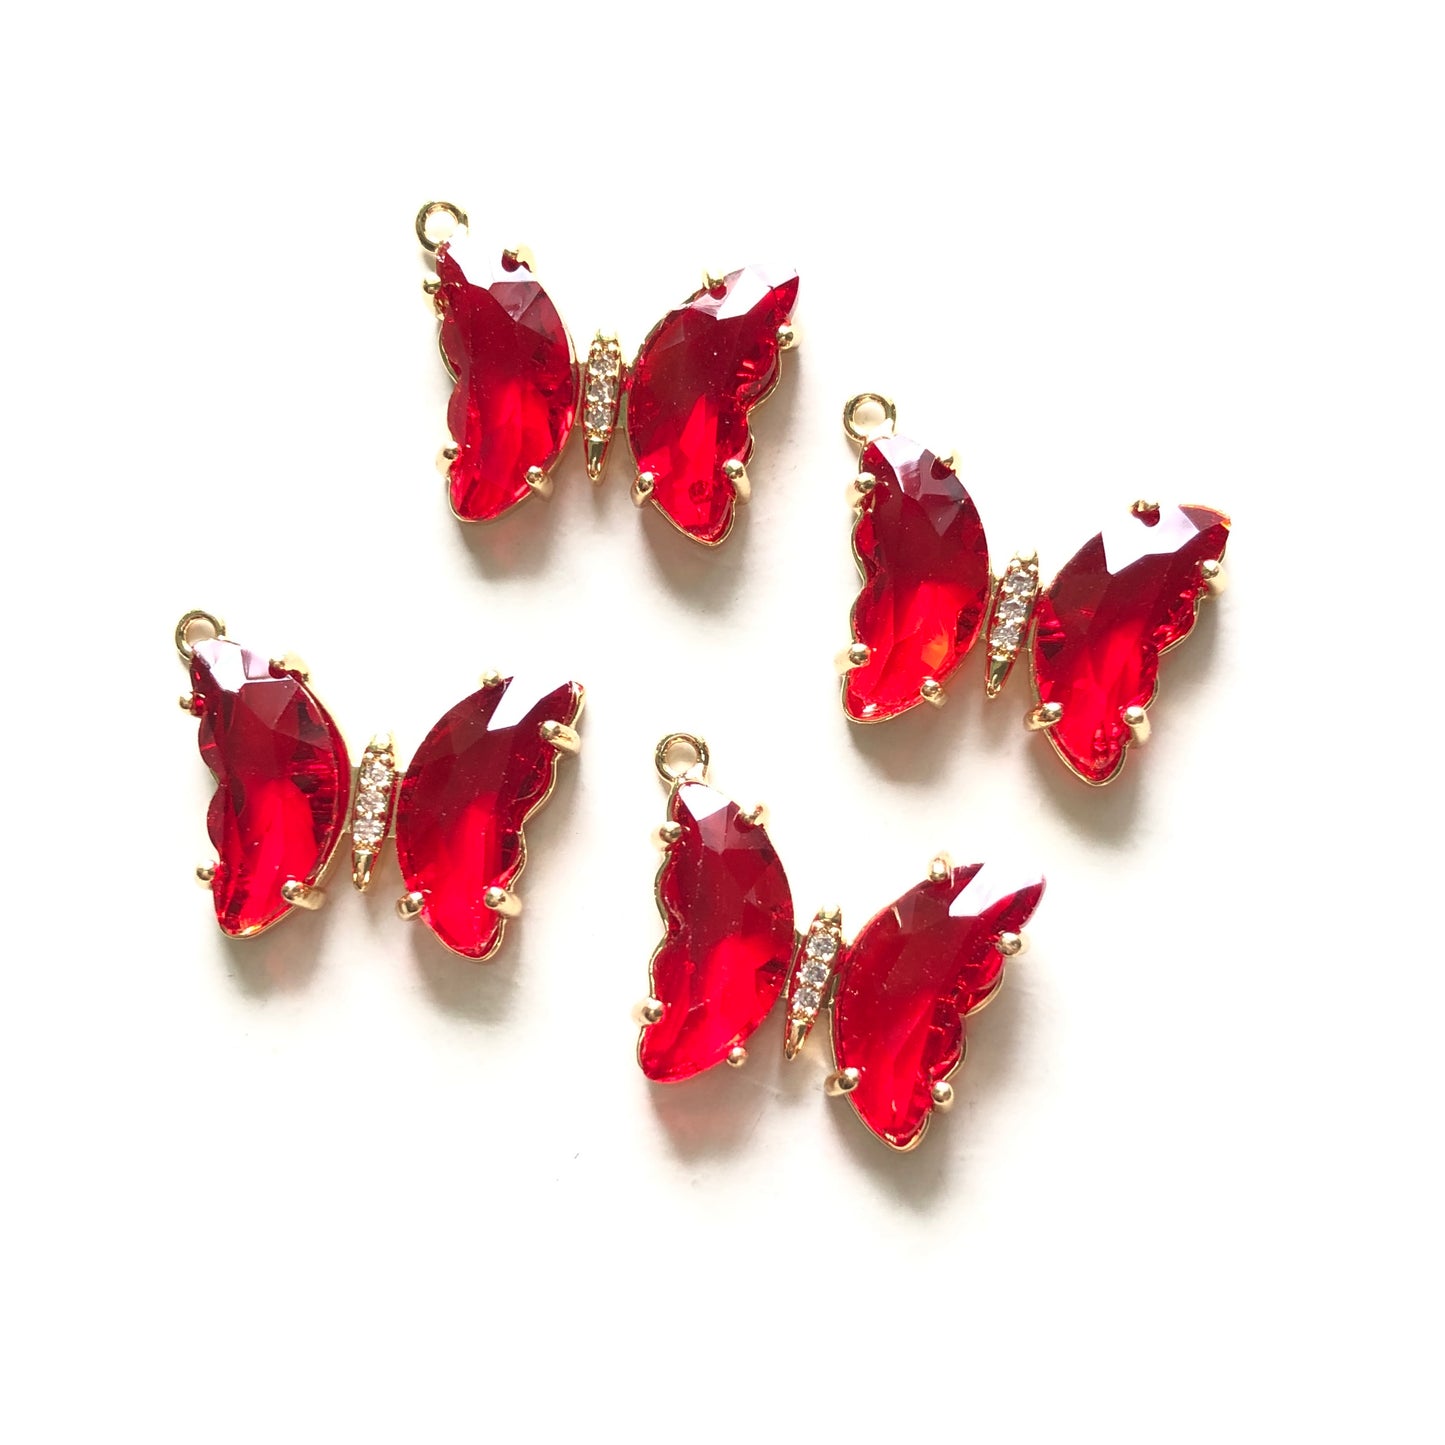 10pcs/lot 20*18mm Colorful Crystal Butterfly Charms Red CZ Paved Charms Butterflies Charms Beads Beyond